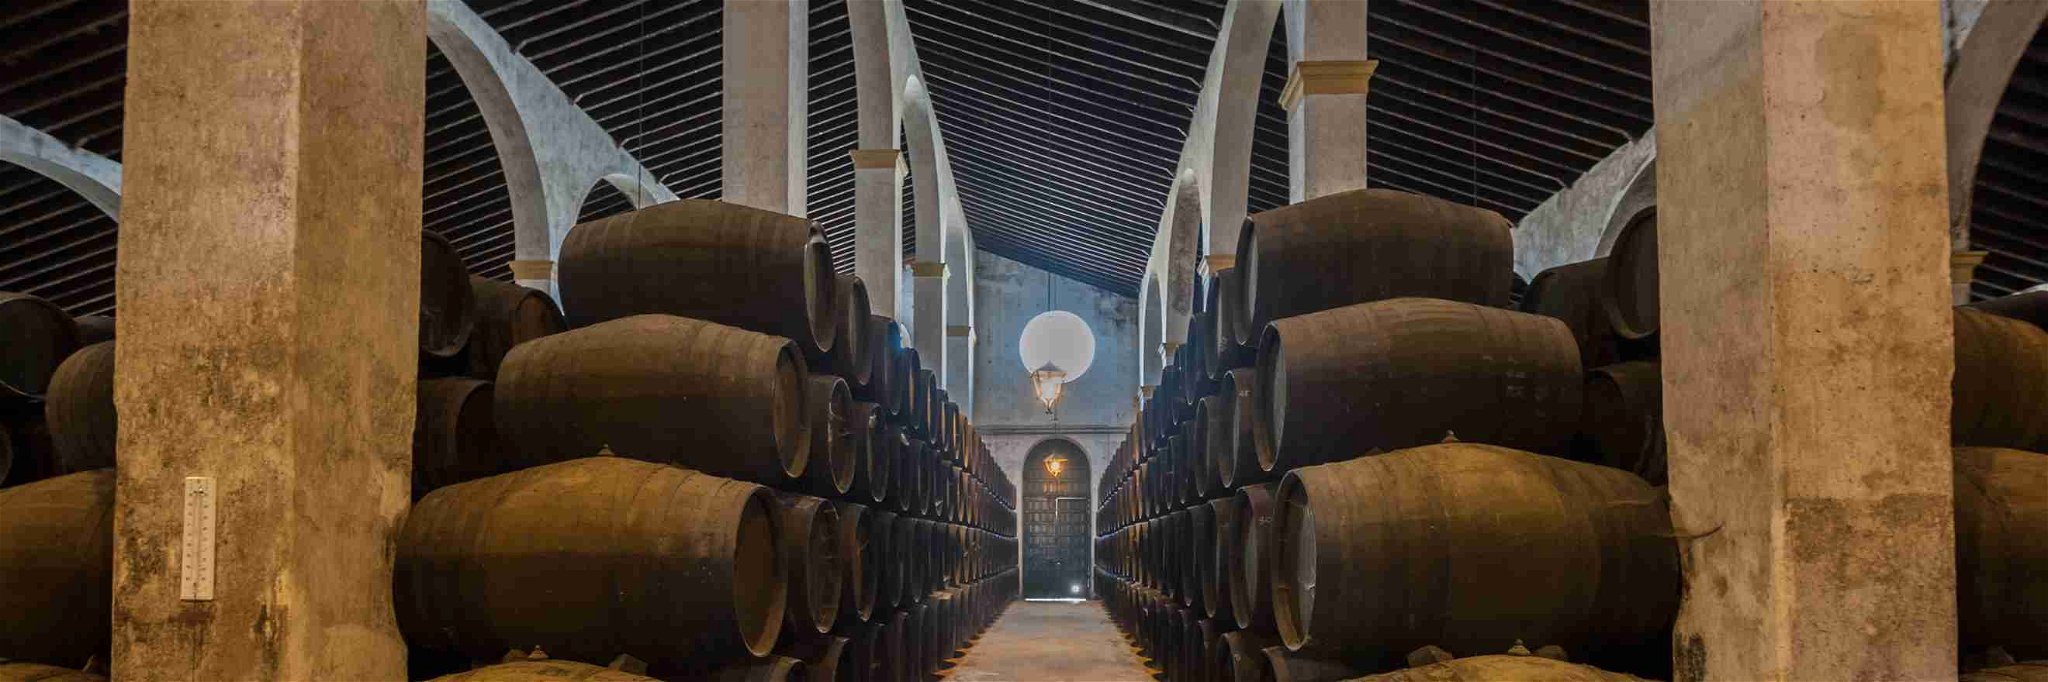 A Typical Sherry Bodega in Jerez, Spain